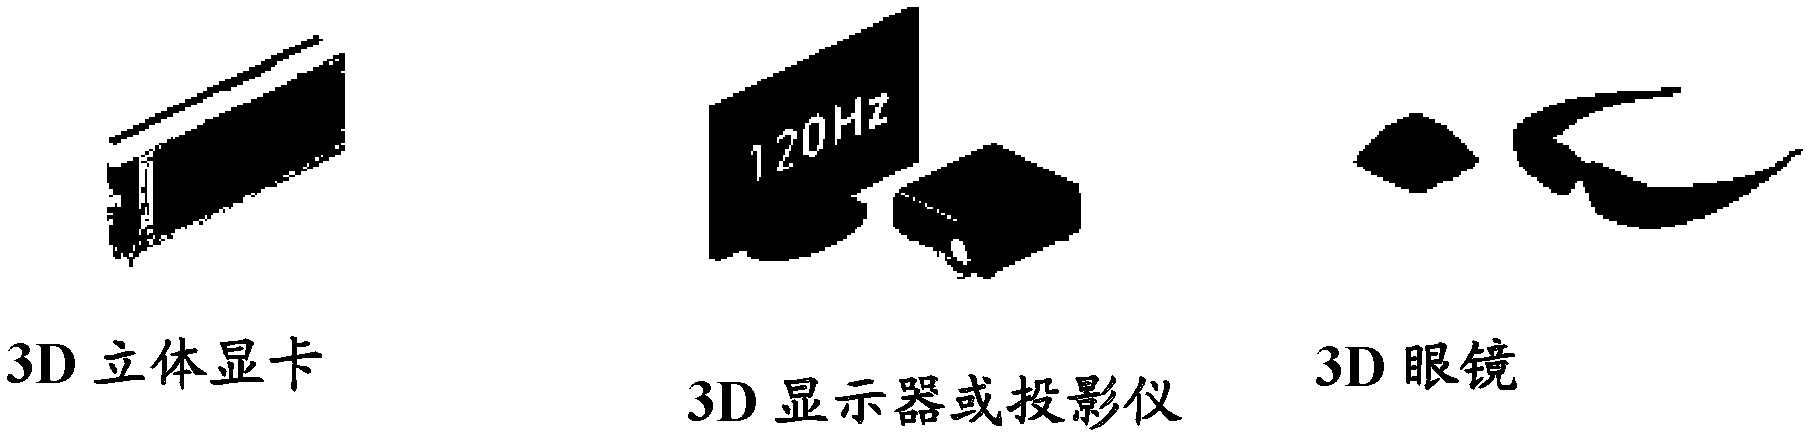 Network 3D (three dimensional) video monitoring system and method and video processing platform